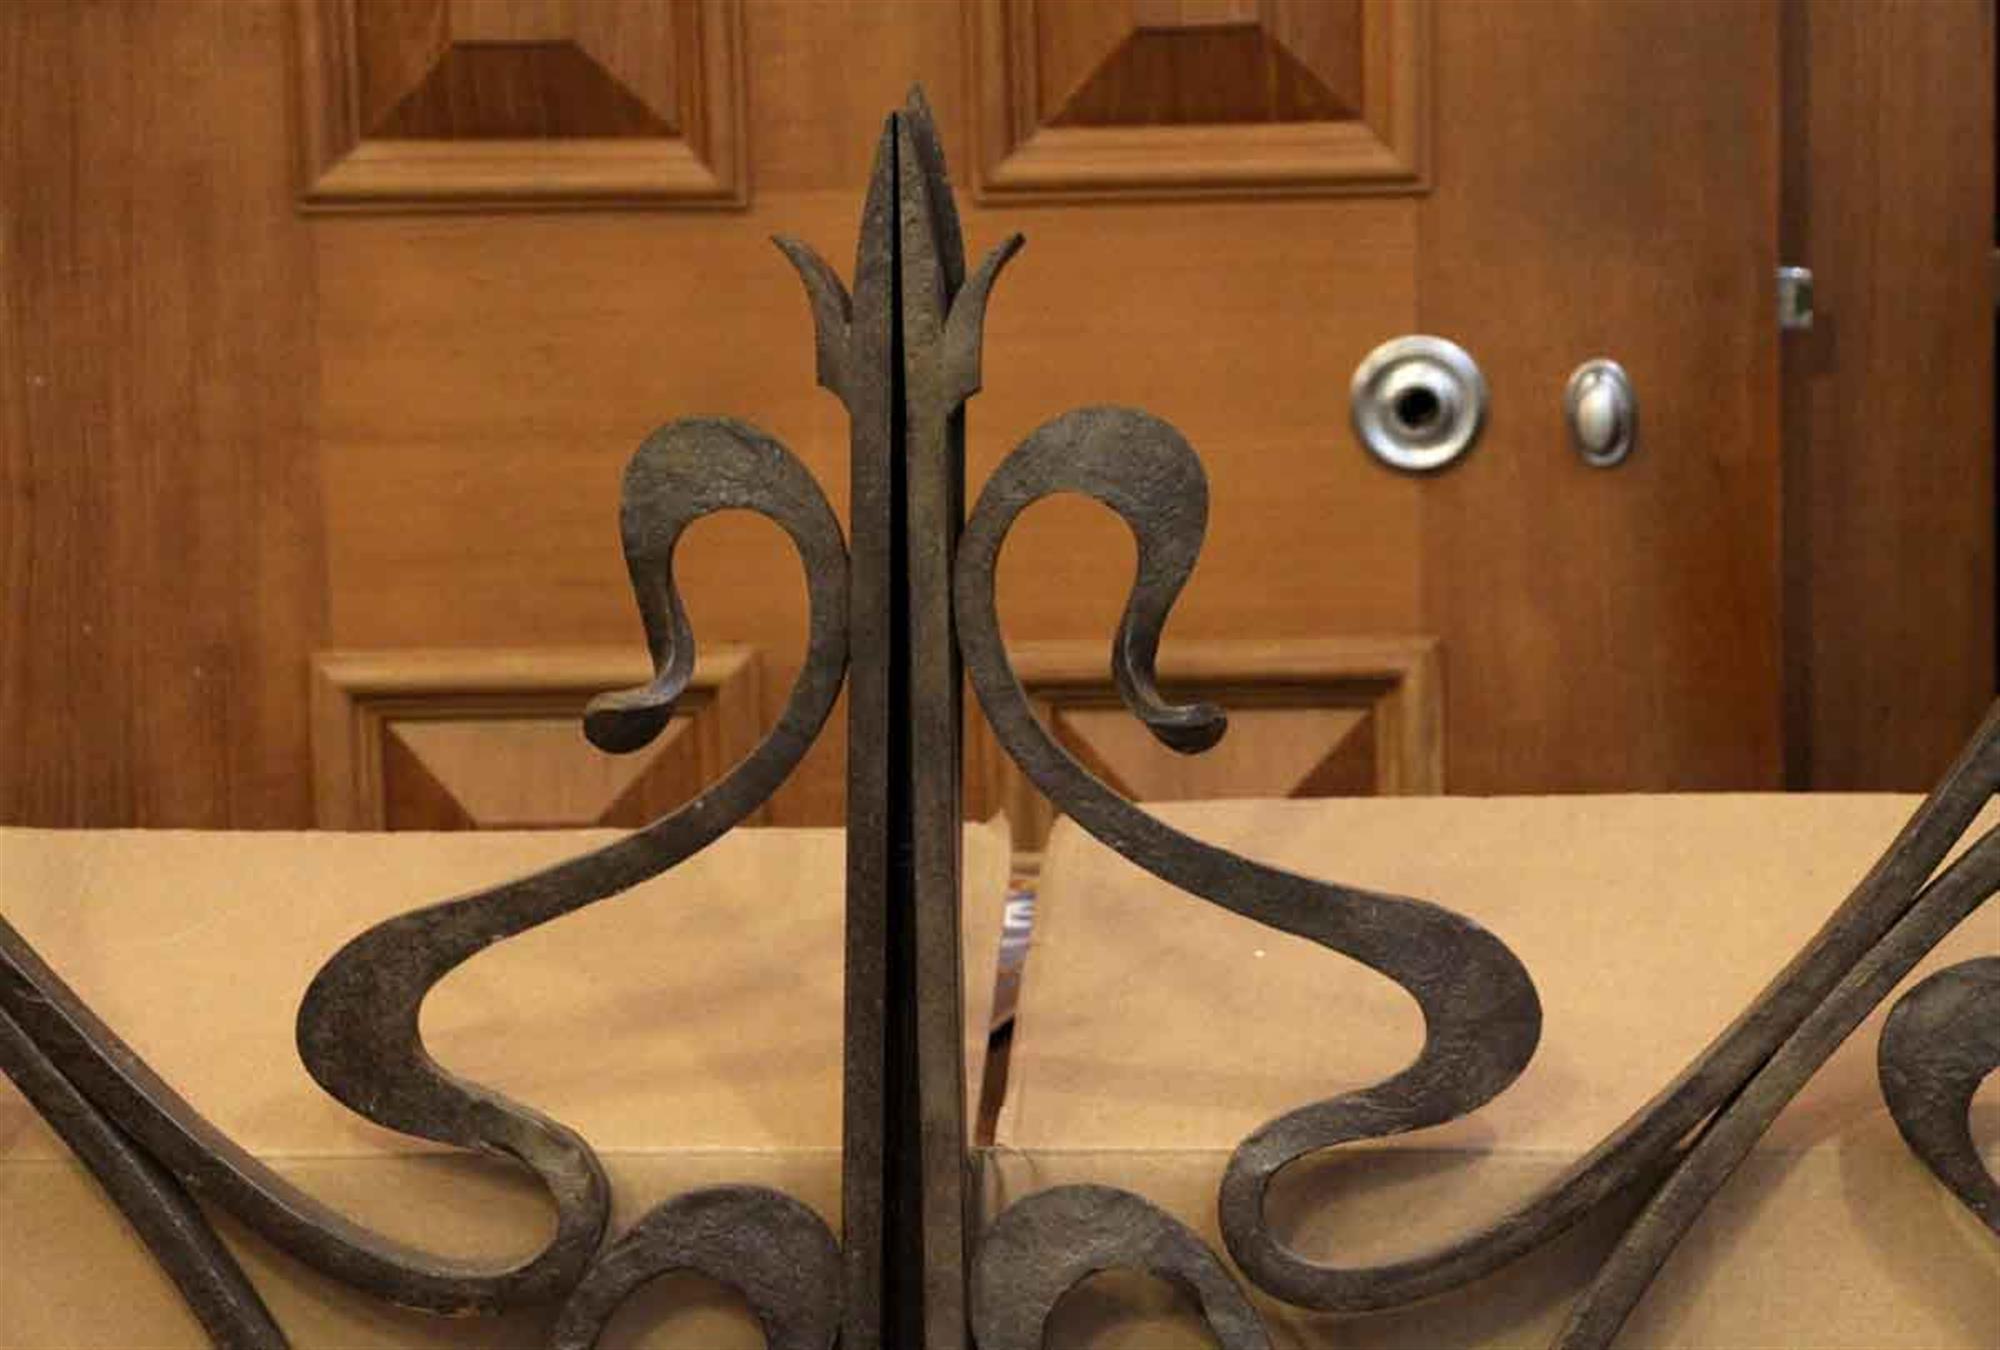 1970s pair of wrought iron Art Nouveau style gates handmade in France. Priced as a pair. This can be seen at our 2420 Broadway location on the upper west side in Manhattan.